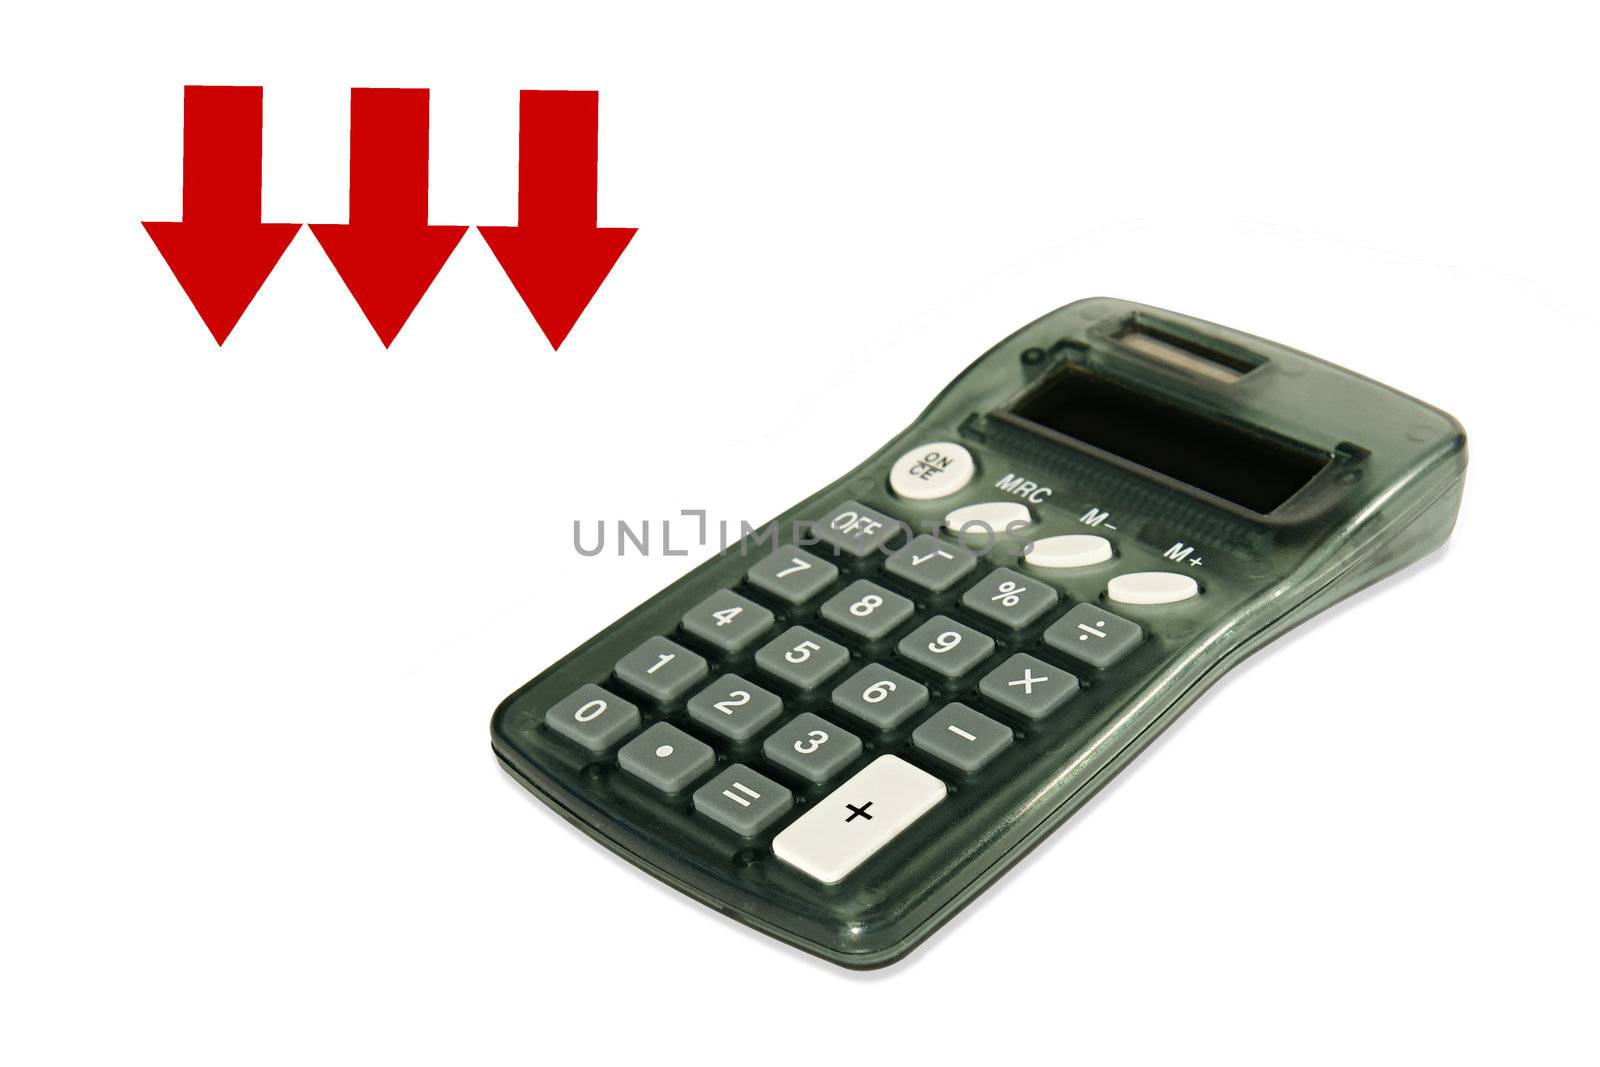 Calculator on white background with three red arrows pointing down.